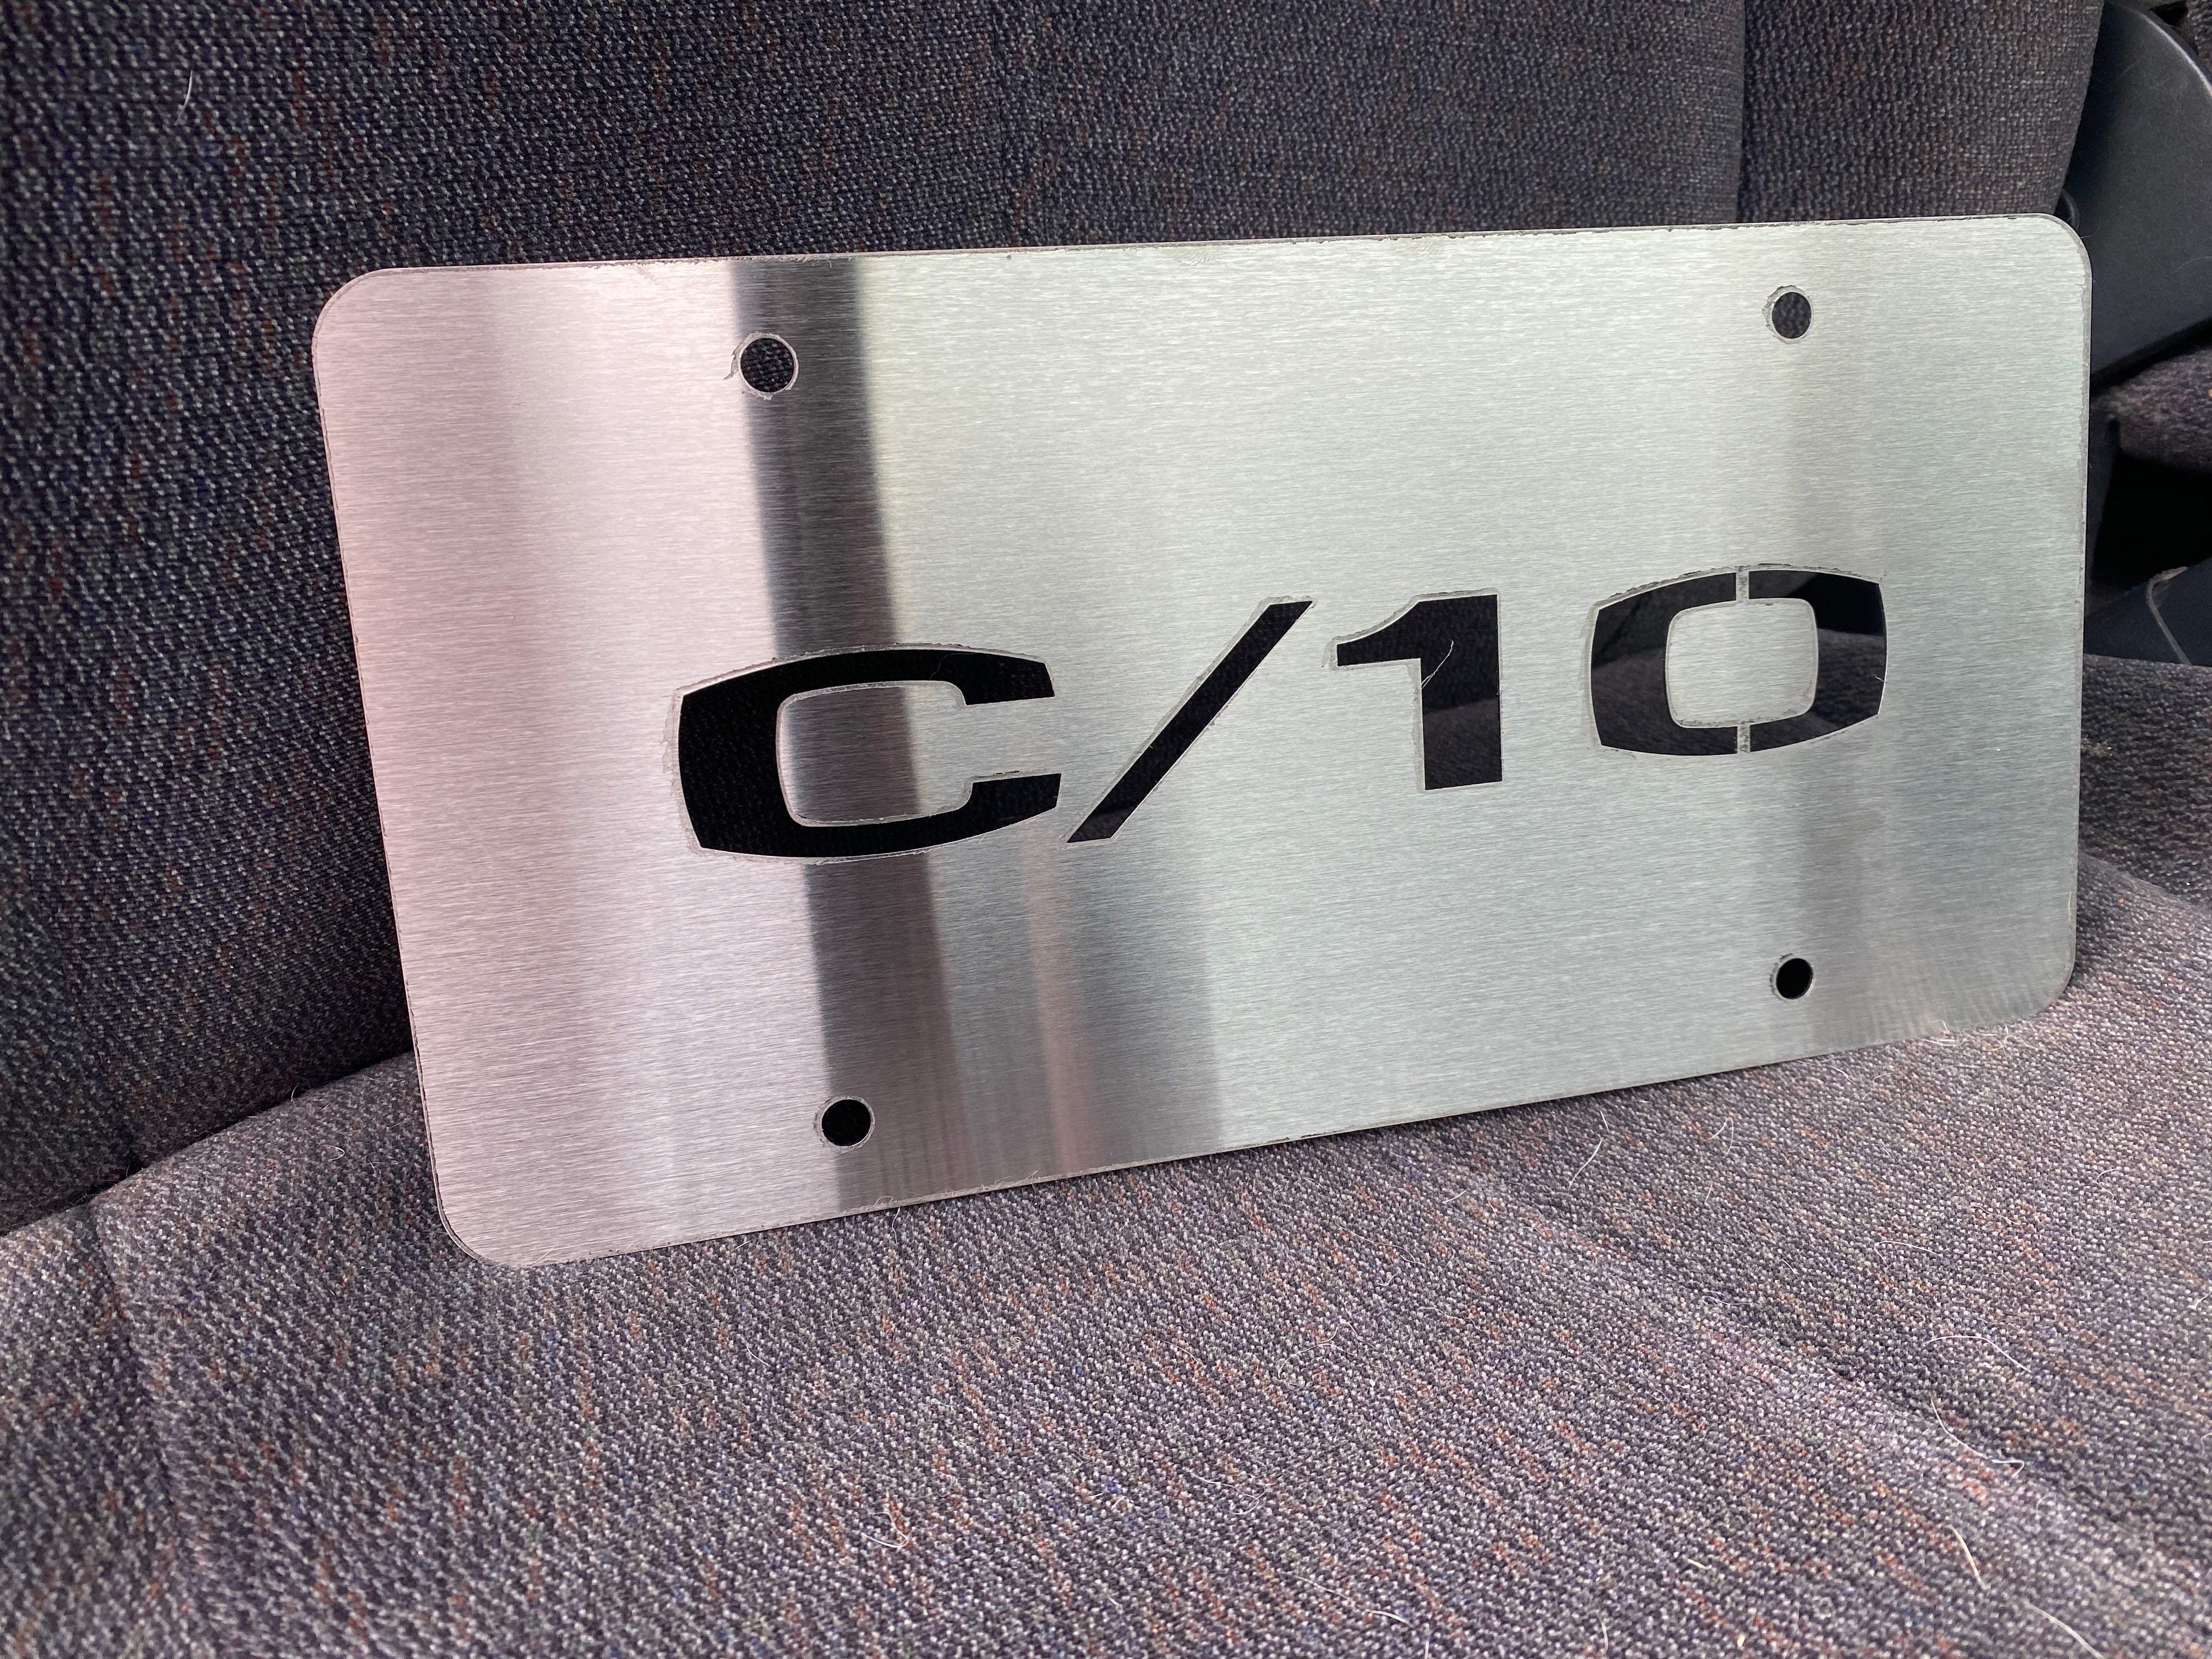 Brushed Stainless C10 License Plate | Engineered Vintage | Custom Winch Mounts & Recovery For Classic Trucks